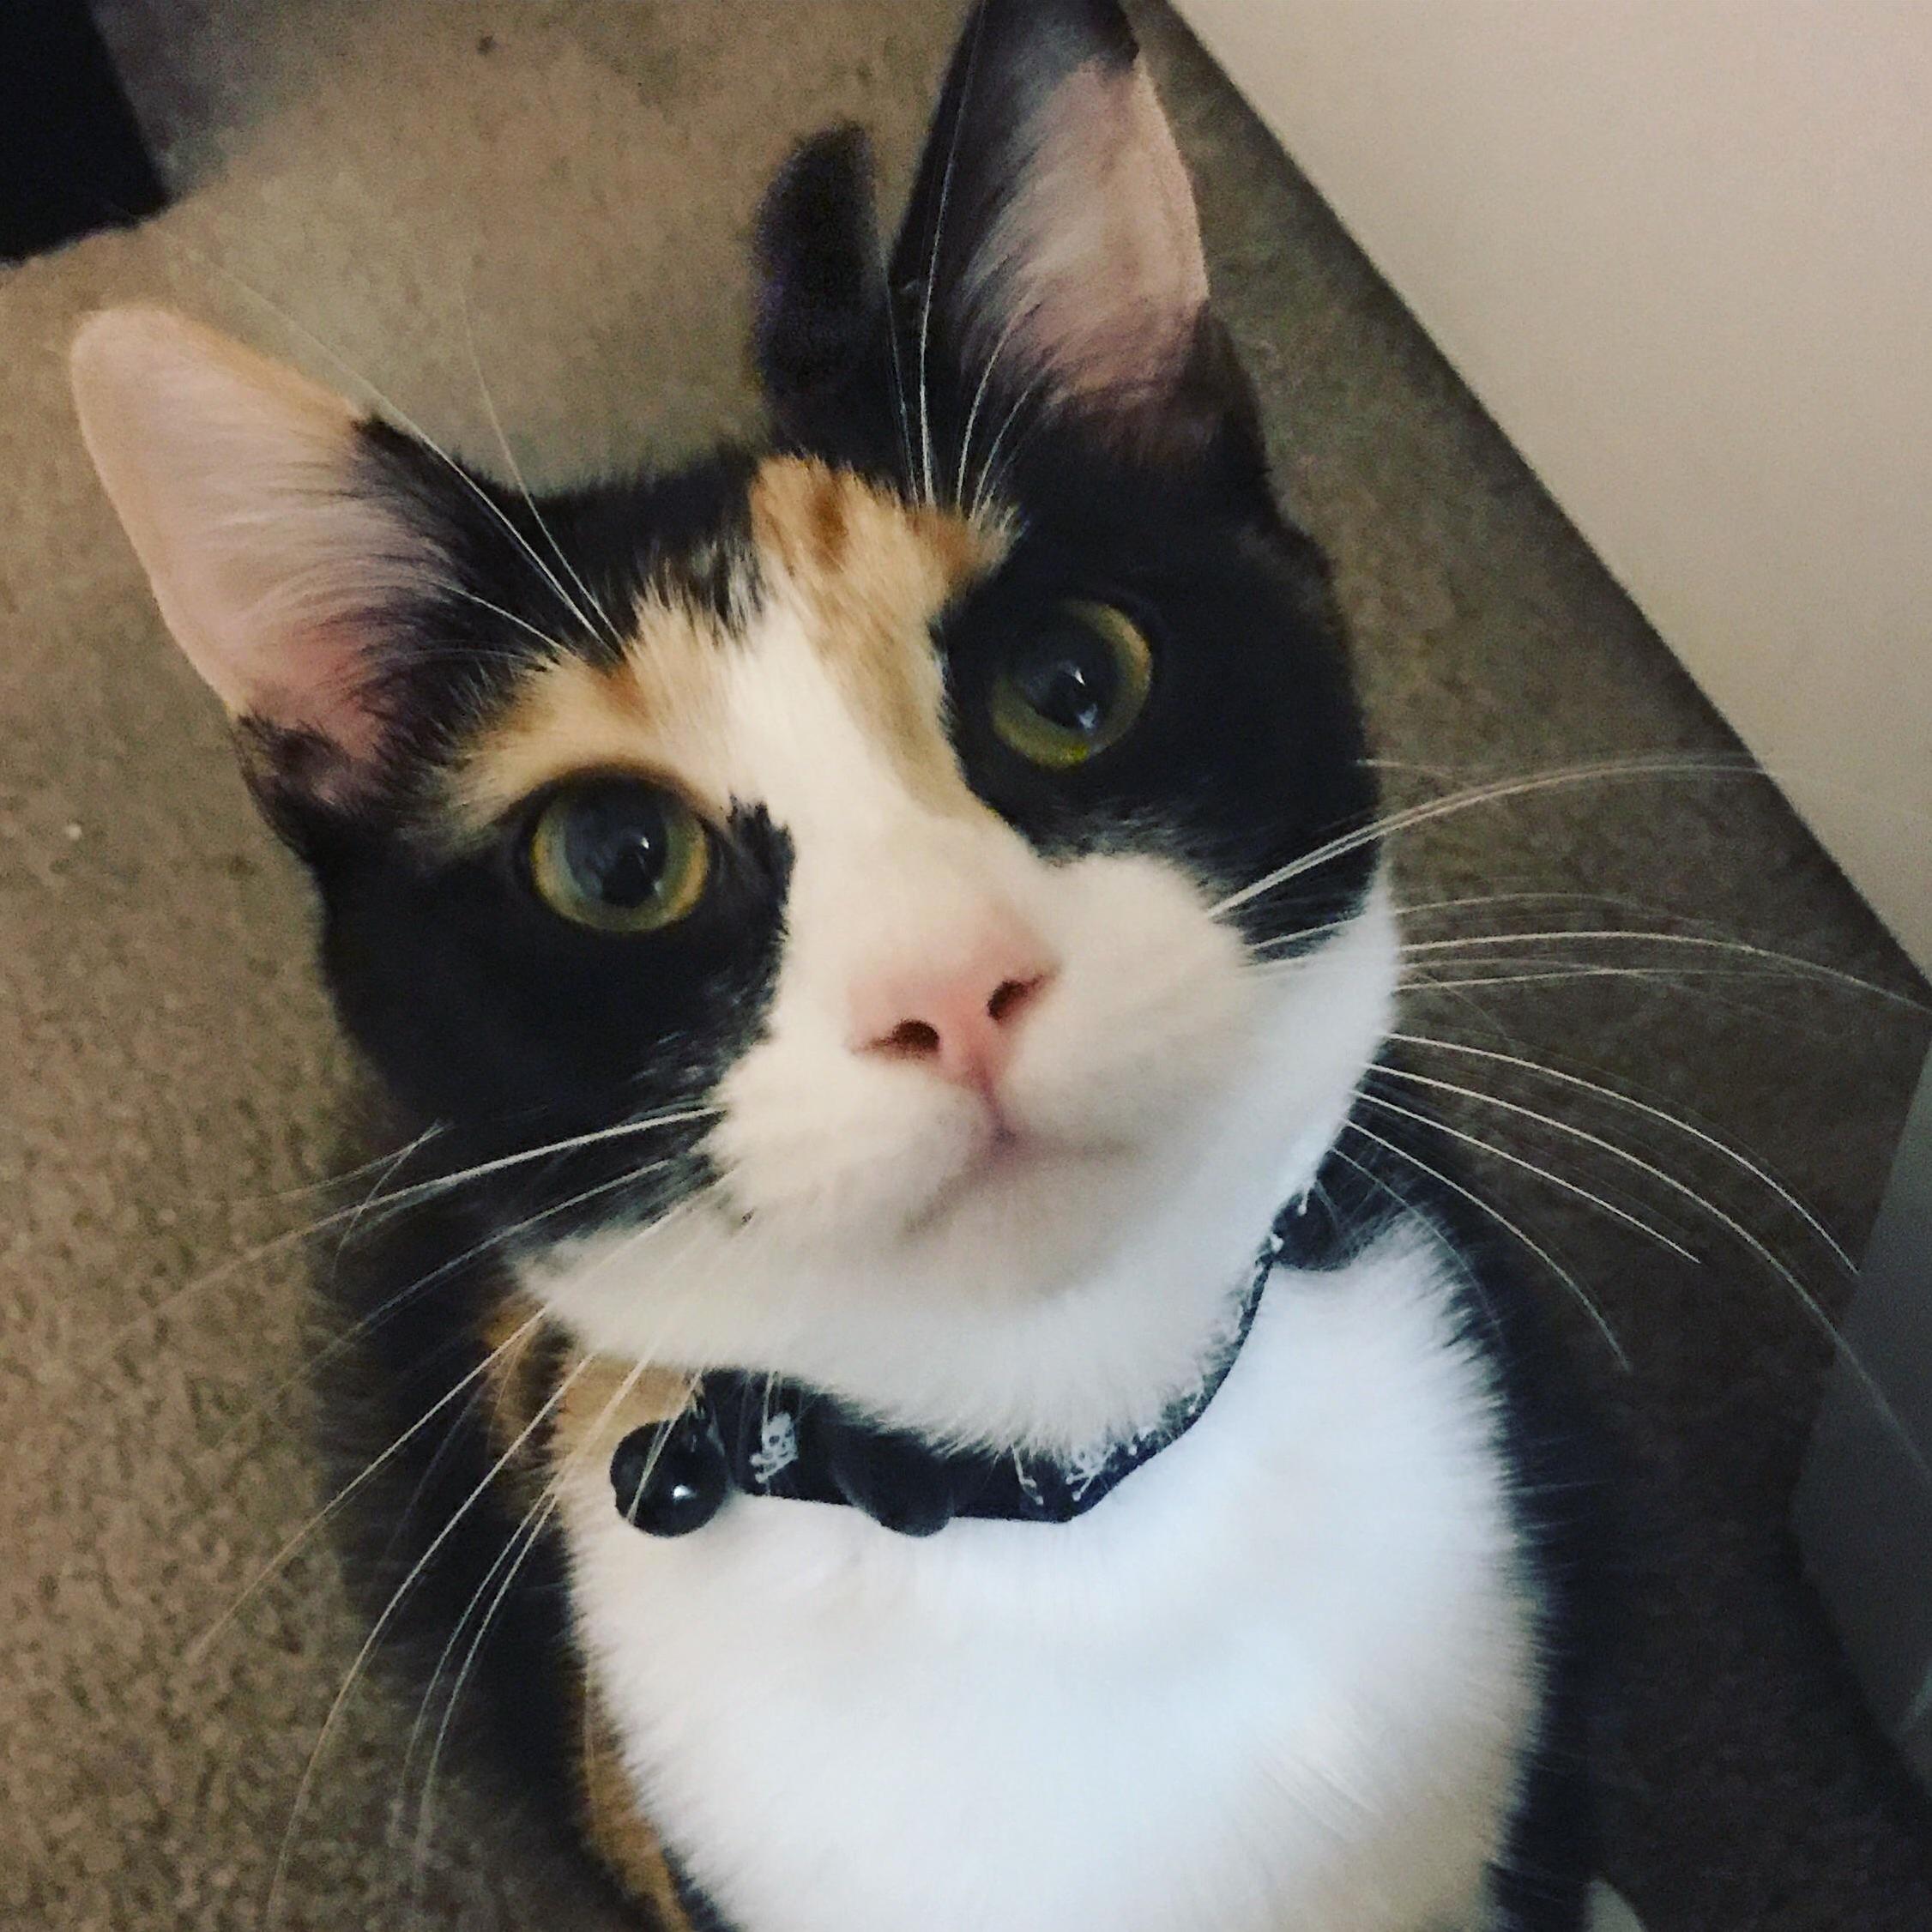 The face of a cat who knows how to get what she wants. be super cute.